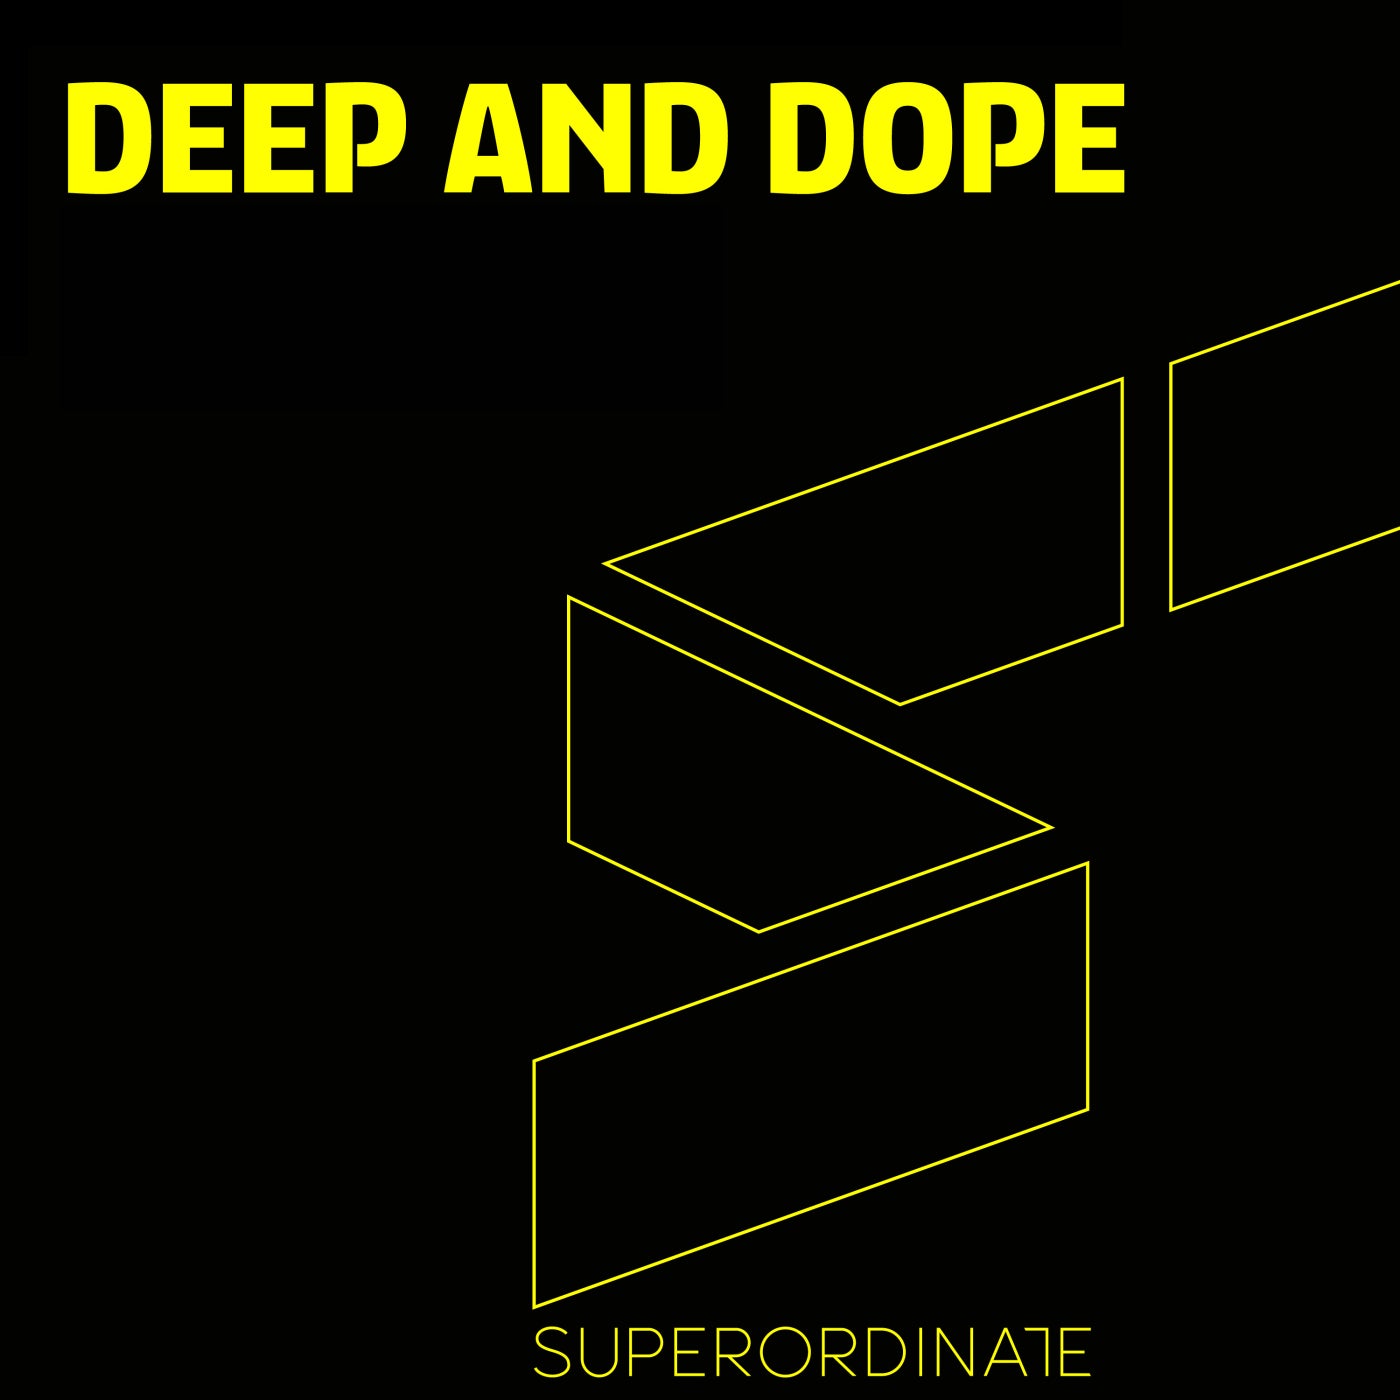 Deep and Dope, Vol. 15